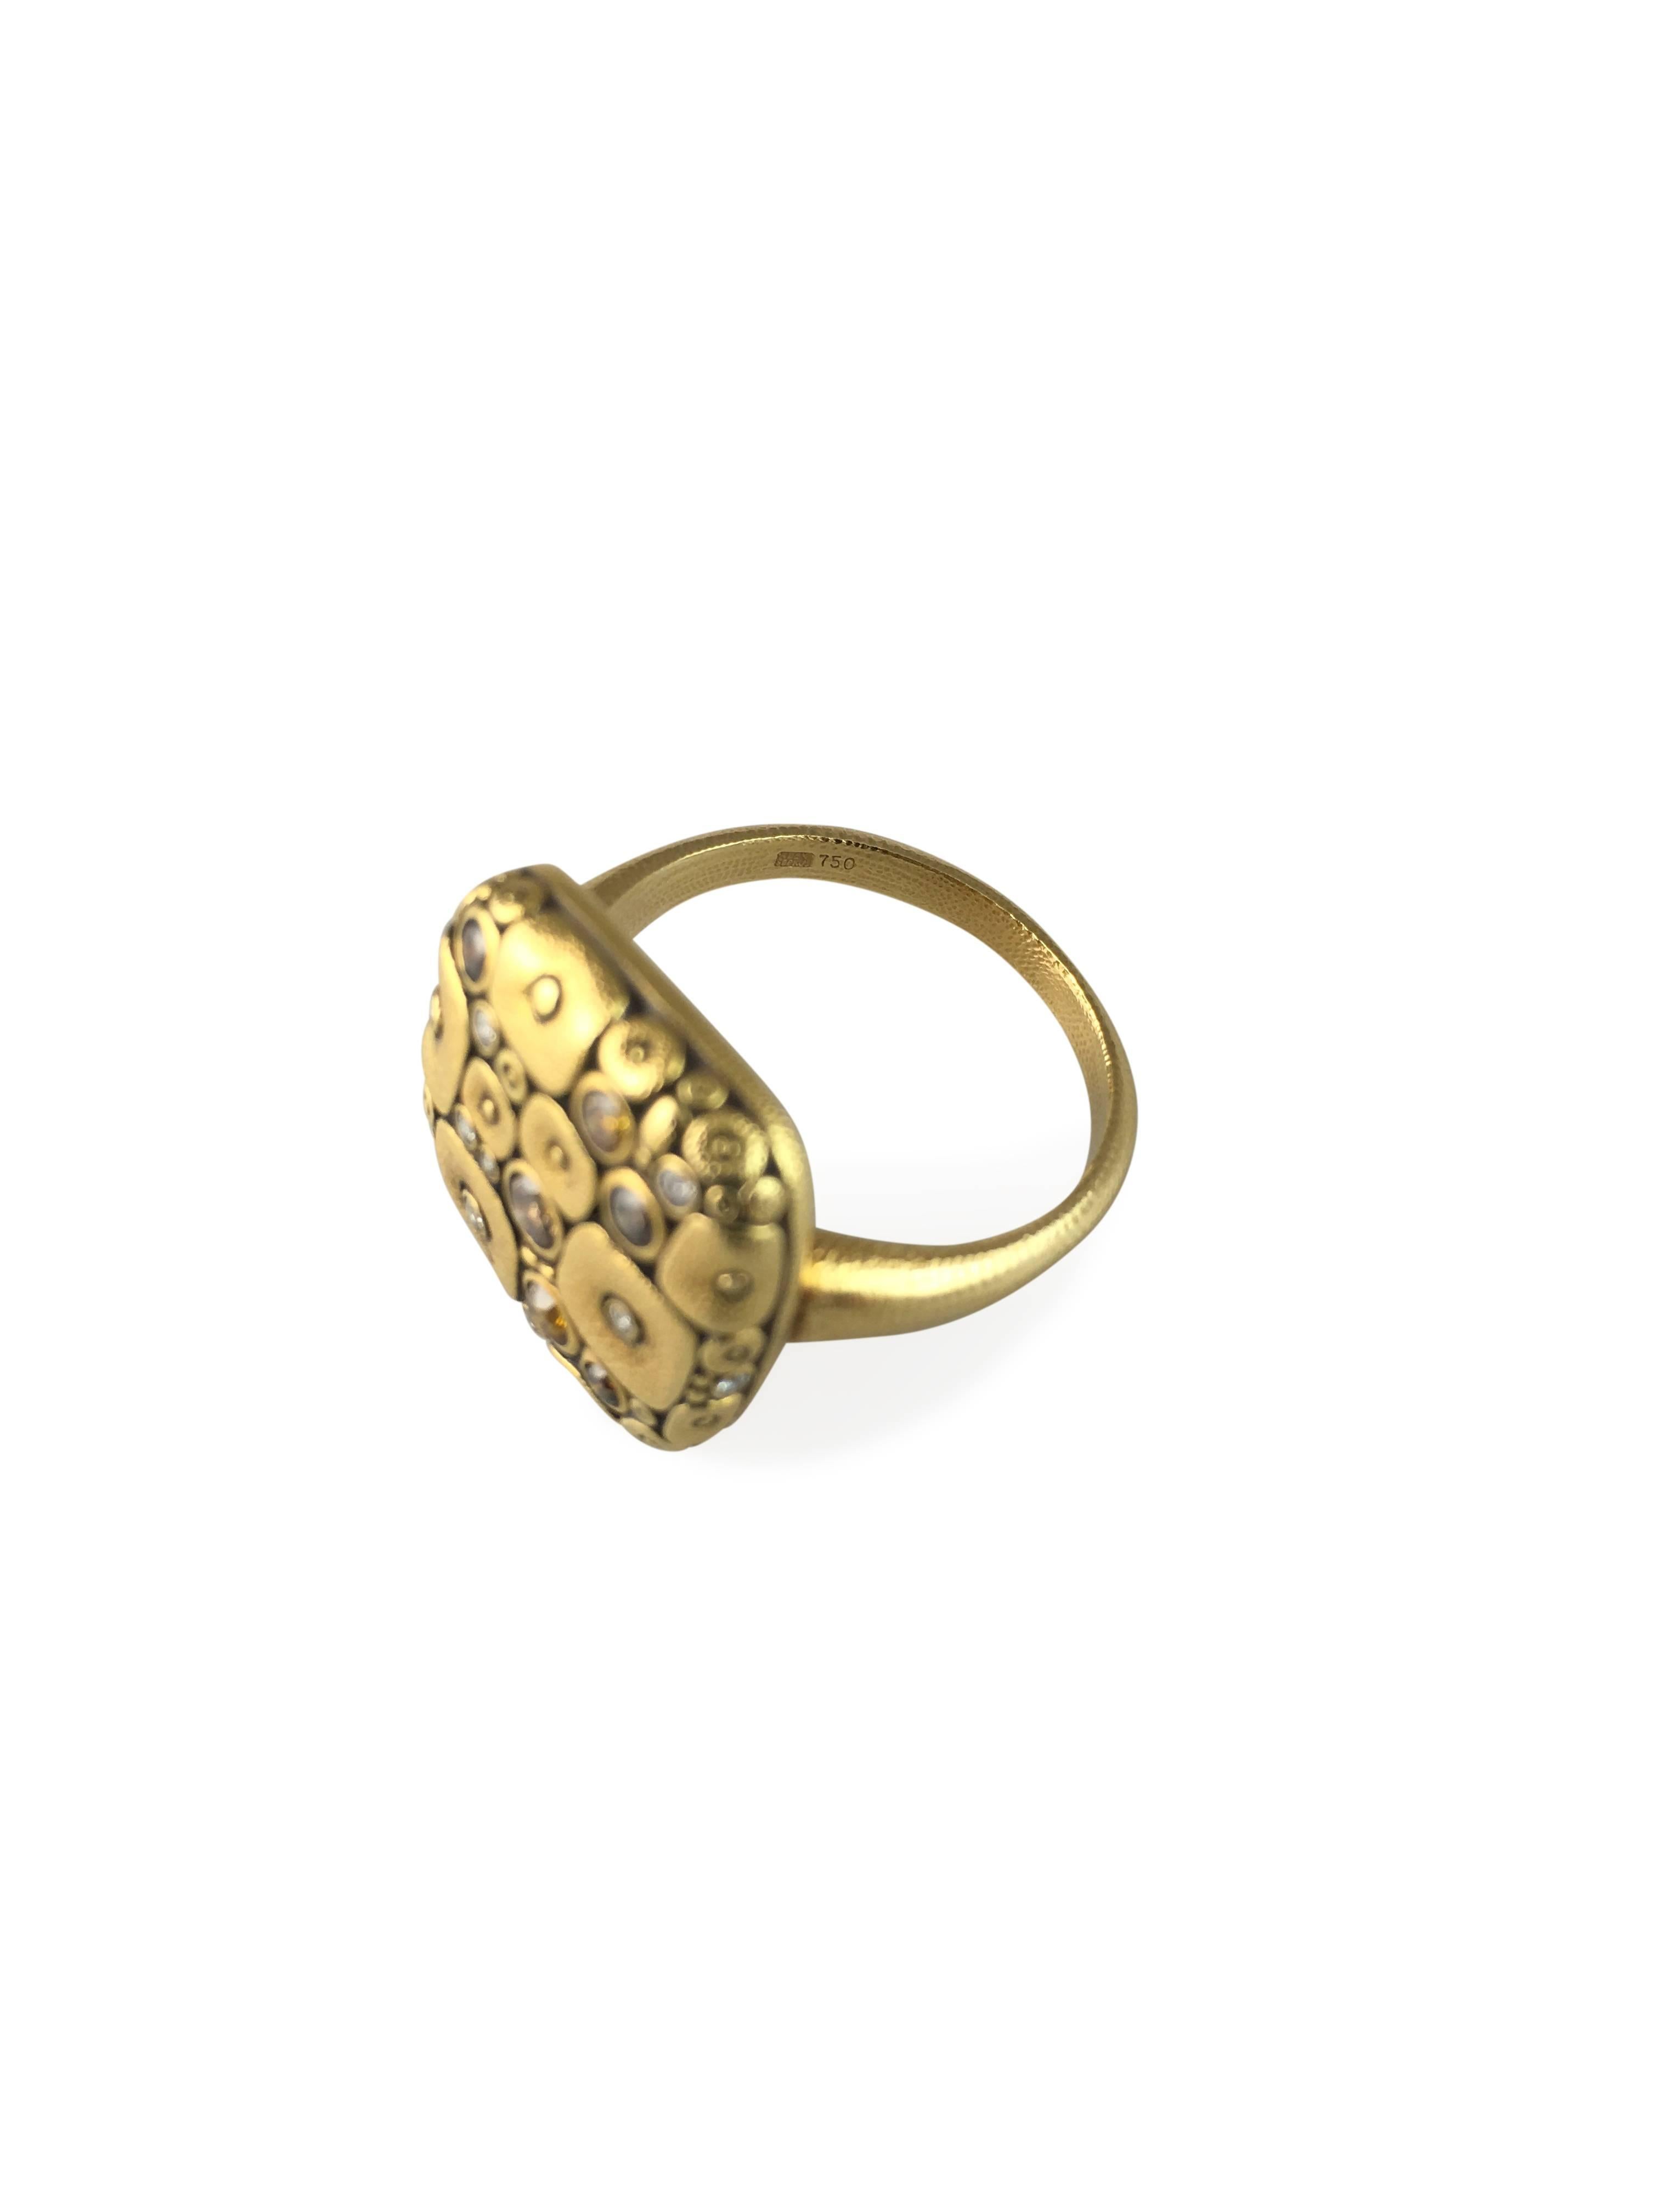 18kt yellow gold diamond ring with .32cts round bezel set diamonds. Square top. Finger size 6 1/2.  Can be sized to fit.  